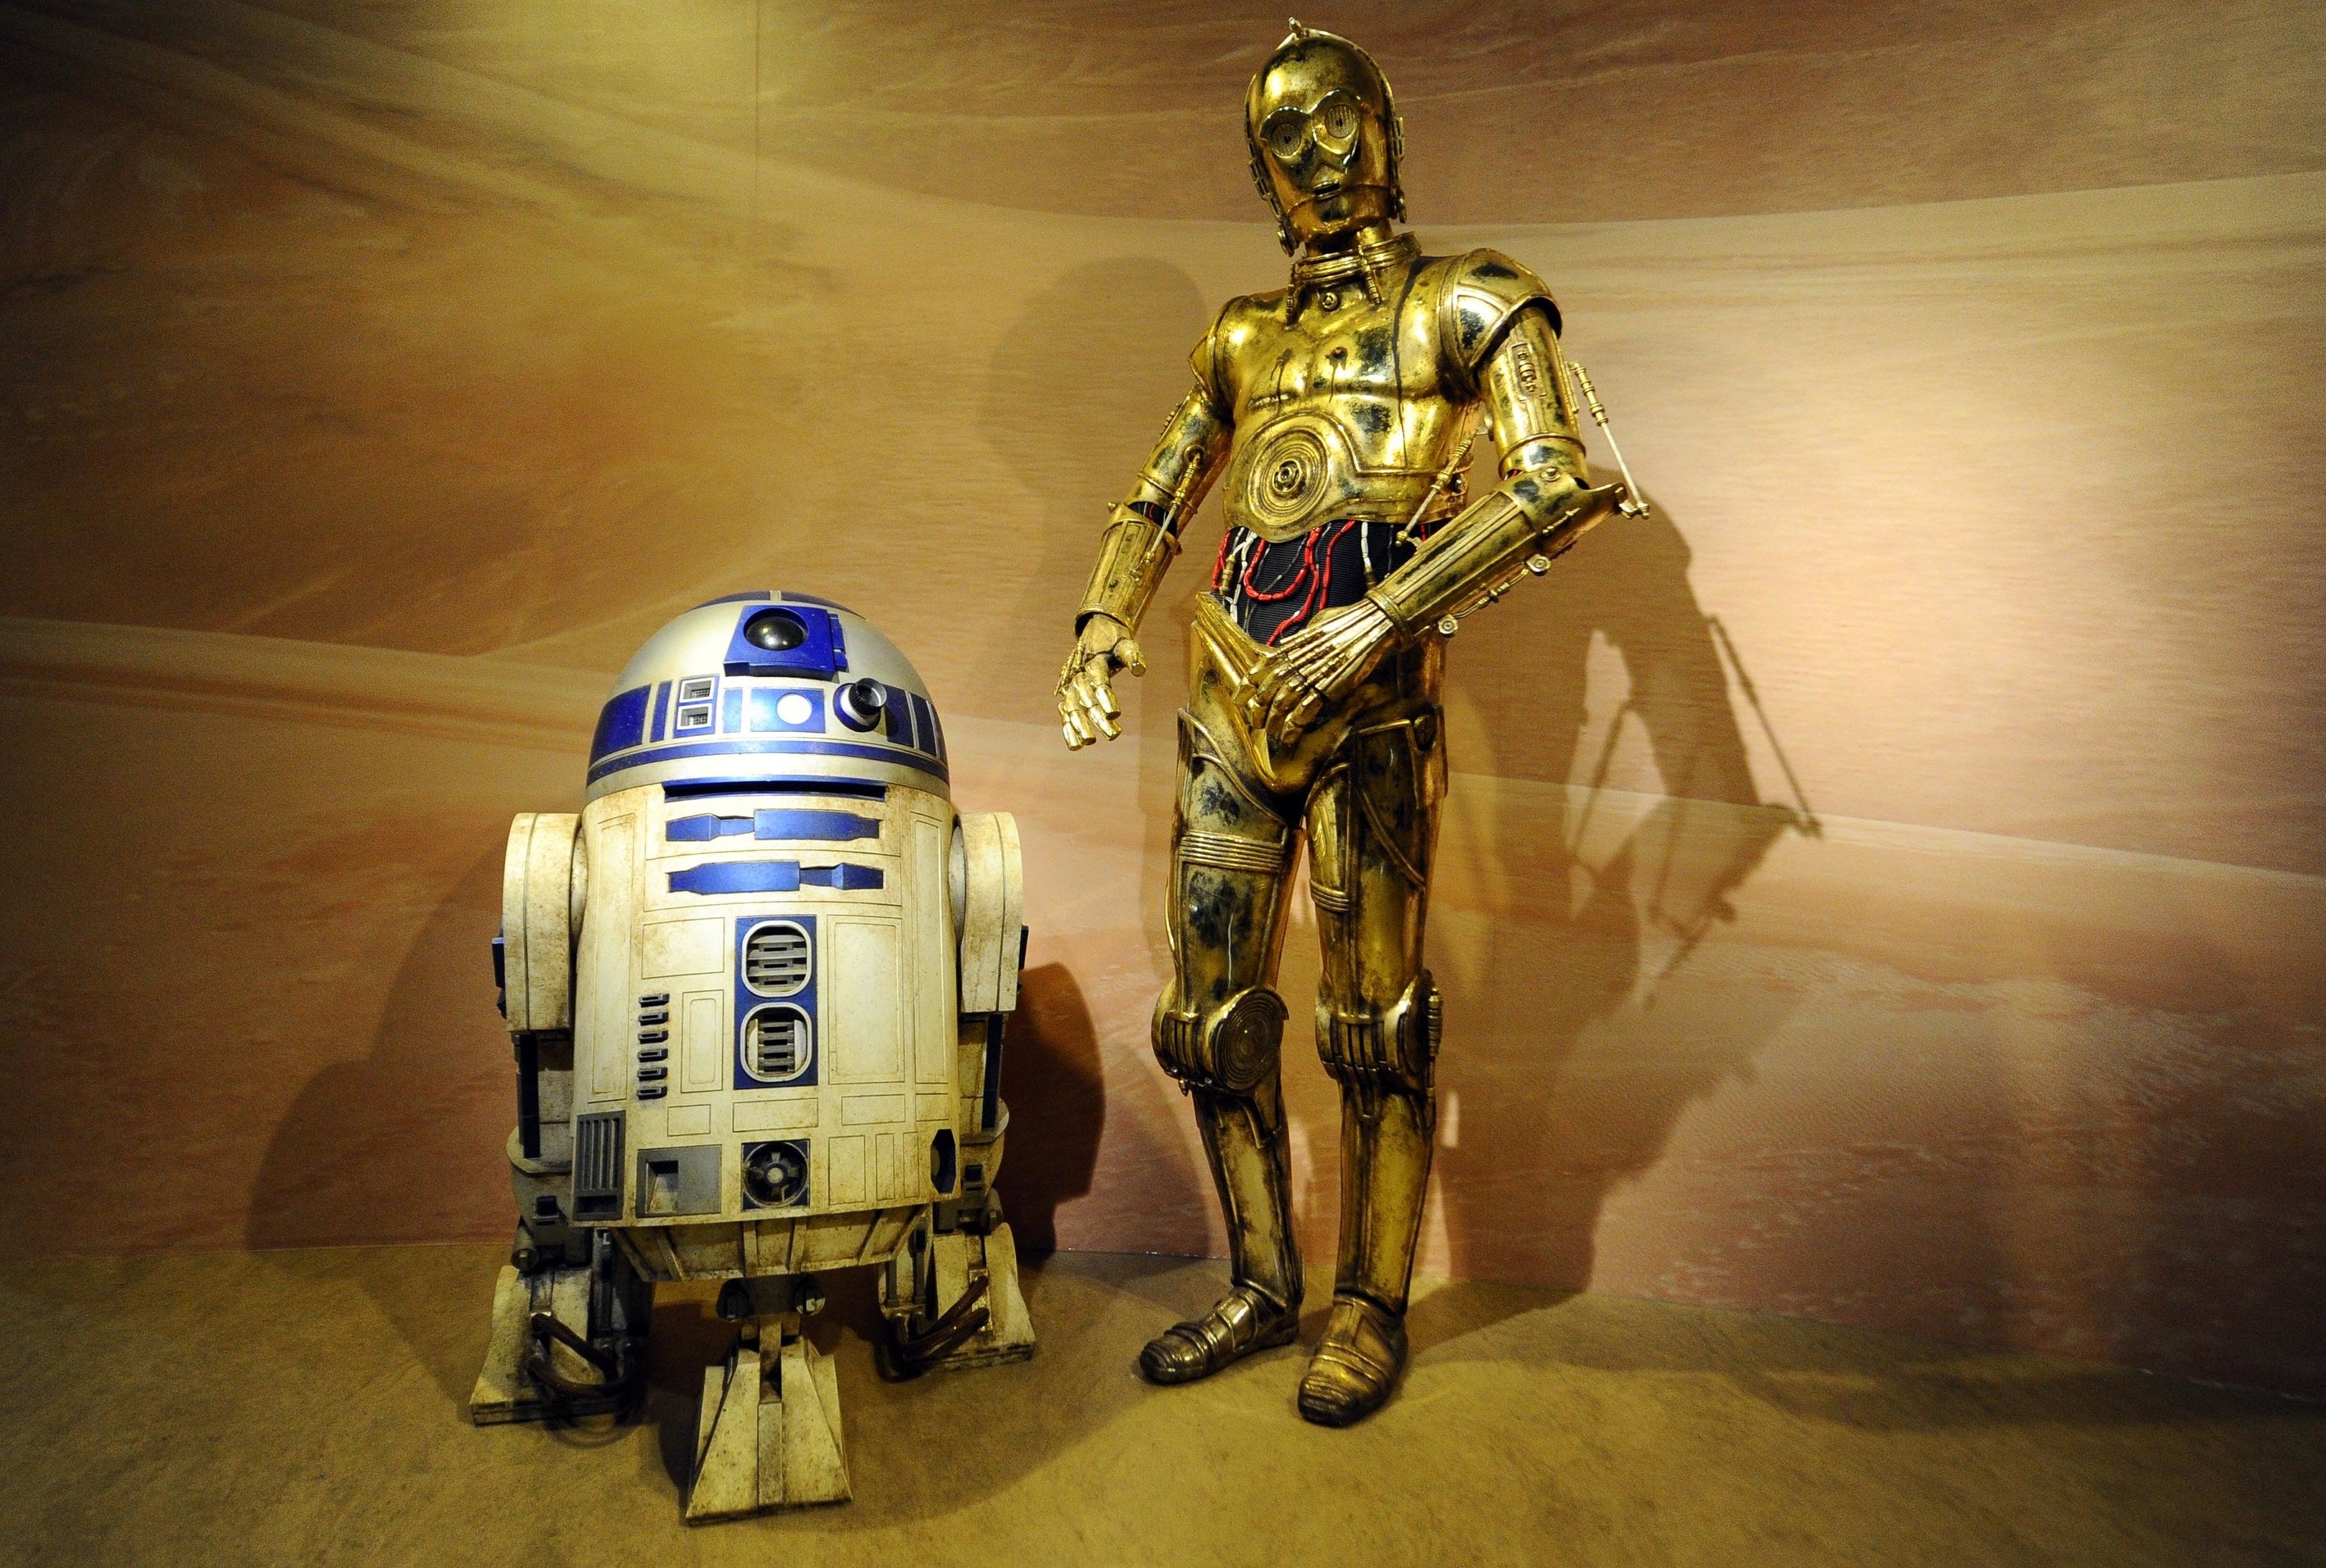 Wax figures of C-3PO and R2-D2 in Madame Tussauds museum in London